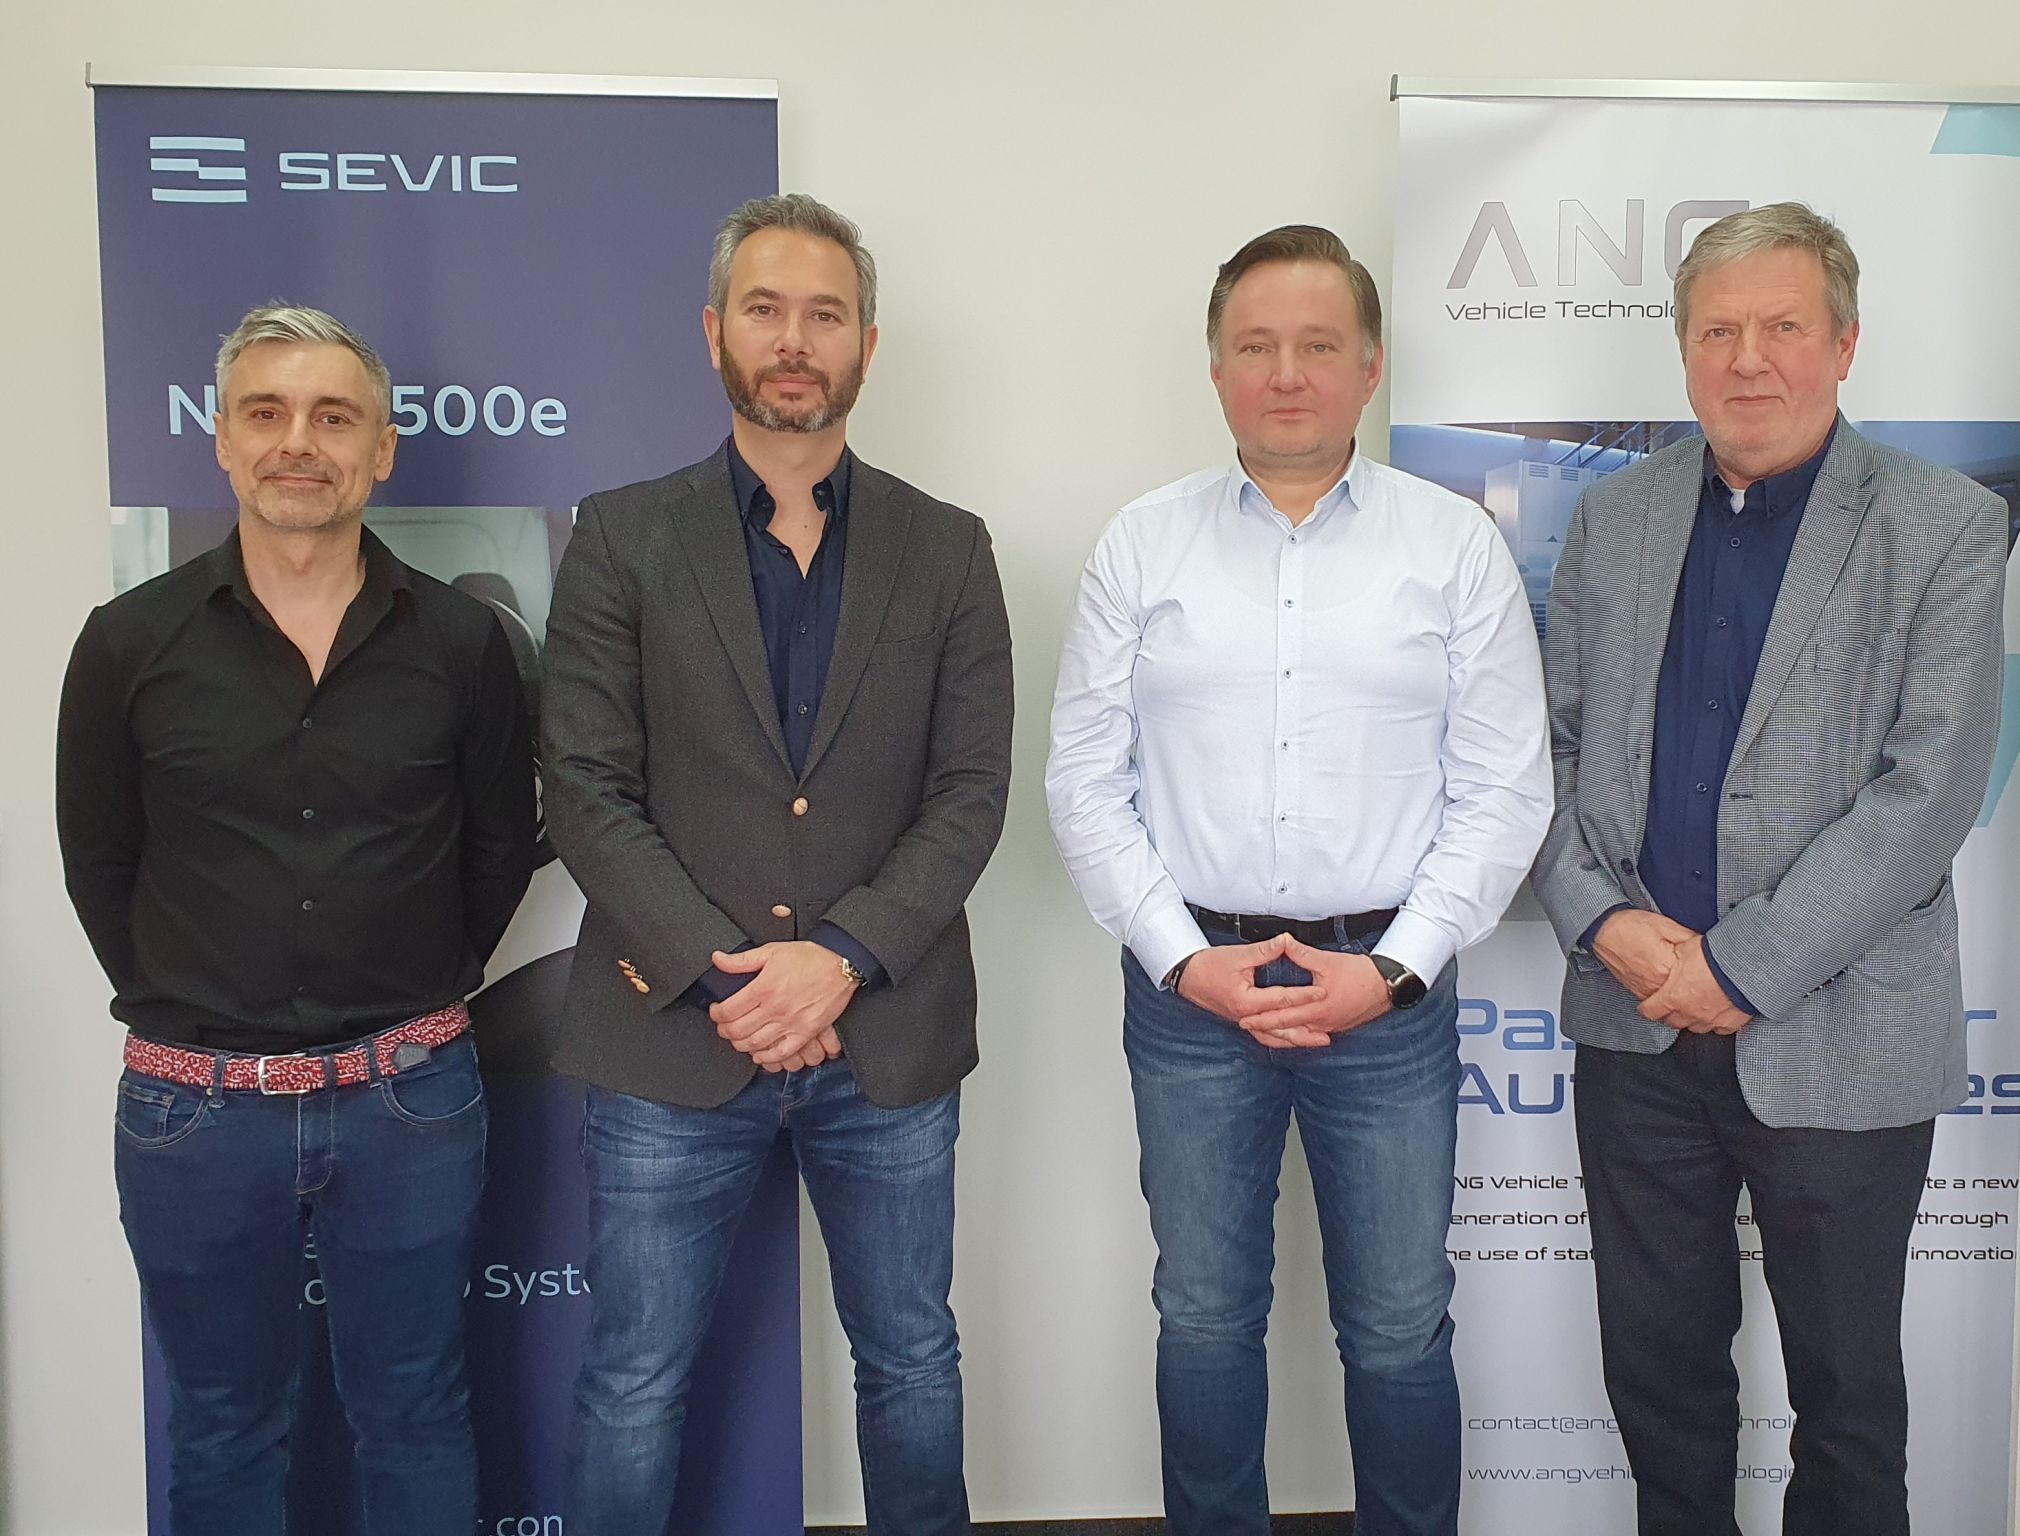 Tomasz Balcerzak (International Sales Manager Sevic Systems SE), Alexander Brilis (General Manager Sevic Systems SE), Daniel Konrad Węgrzynek (CEO EV Fleet Group & CEO ANG Vehicle Technologies) and Roman Rosinski (Sales Manager ANG Vehicle Technologies) at the contract signing.